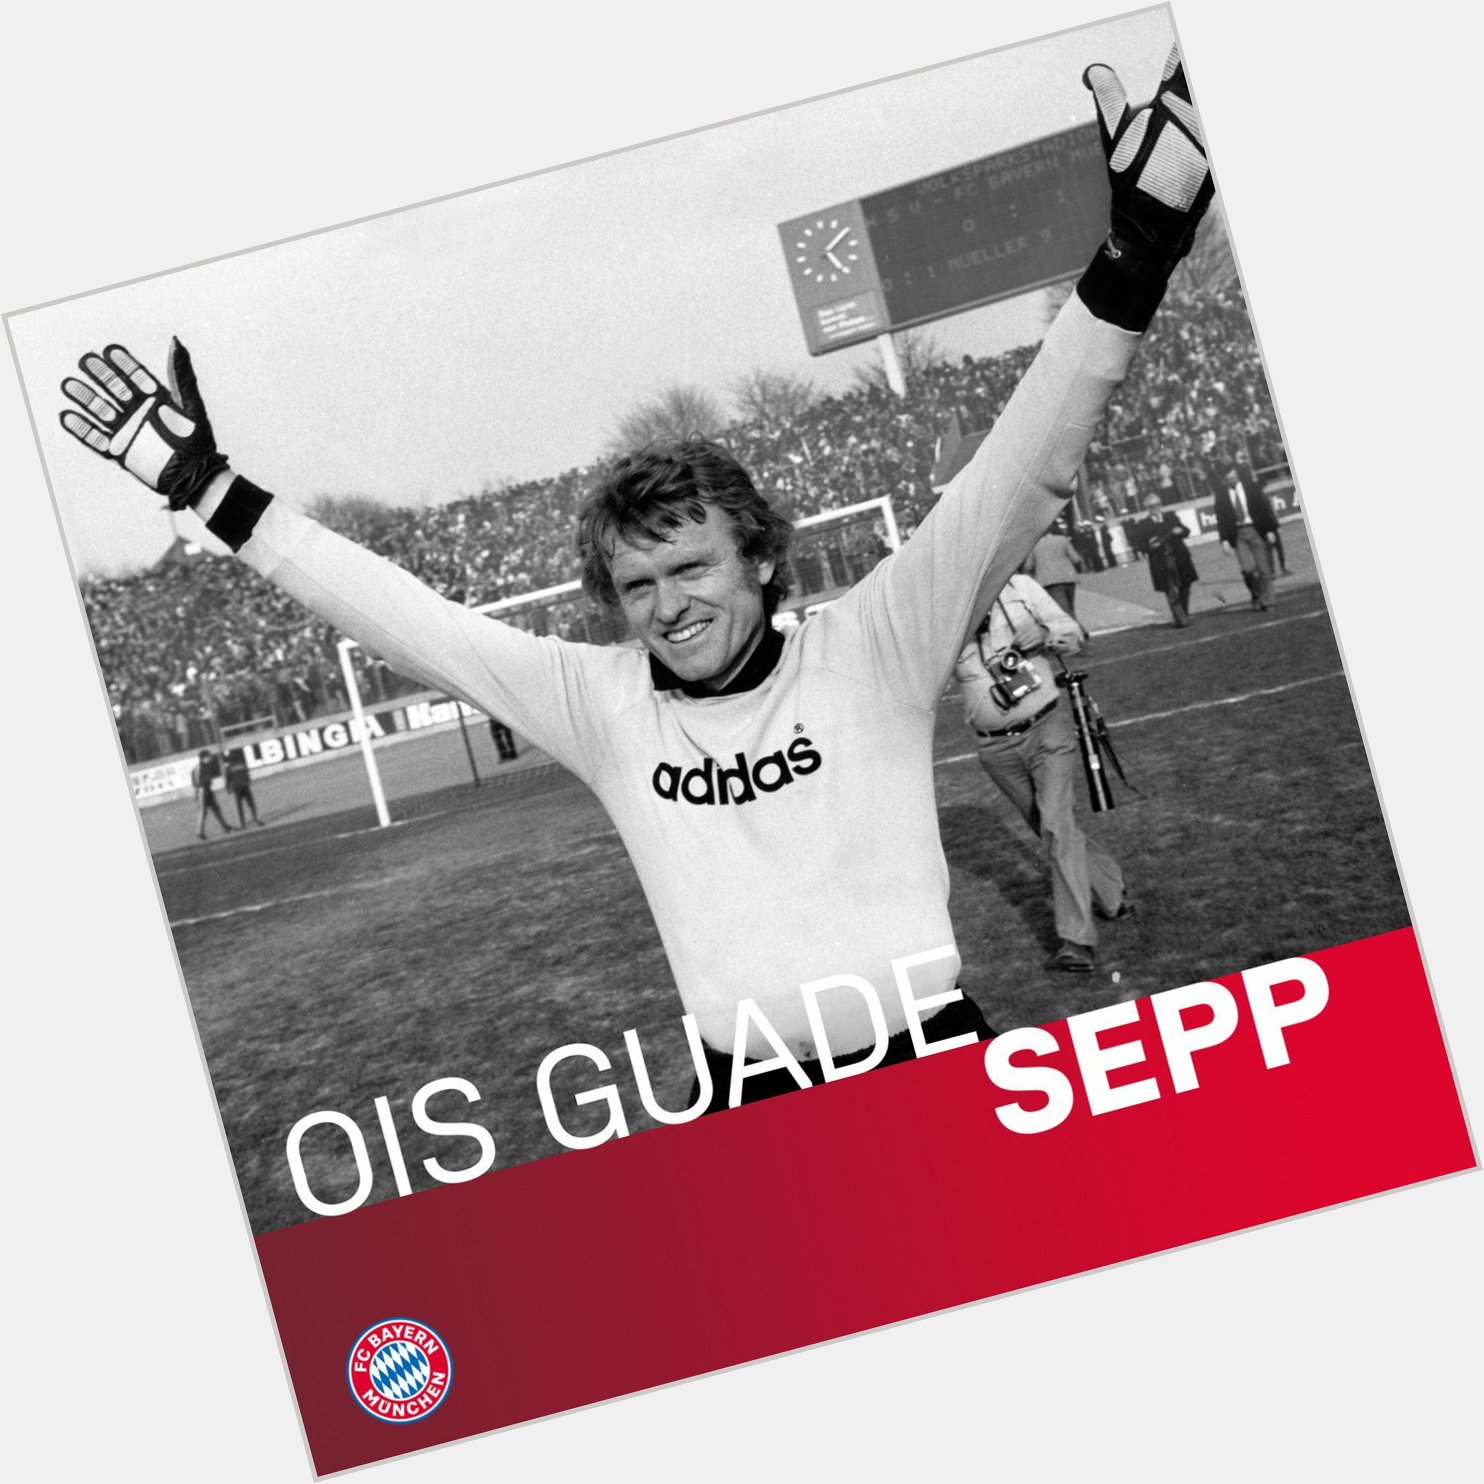 FCBayernEN: Happy 7  6  th birthday to a club legend! All the best, Sepp    